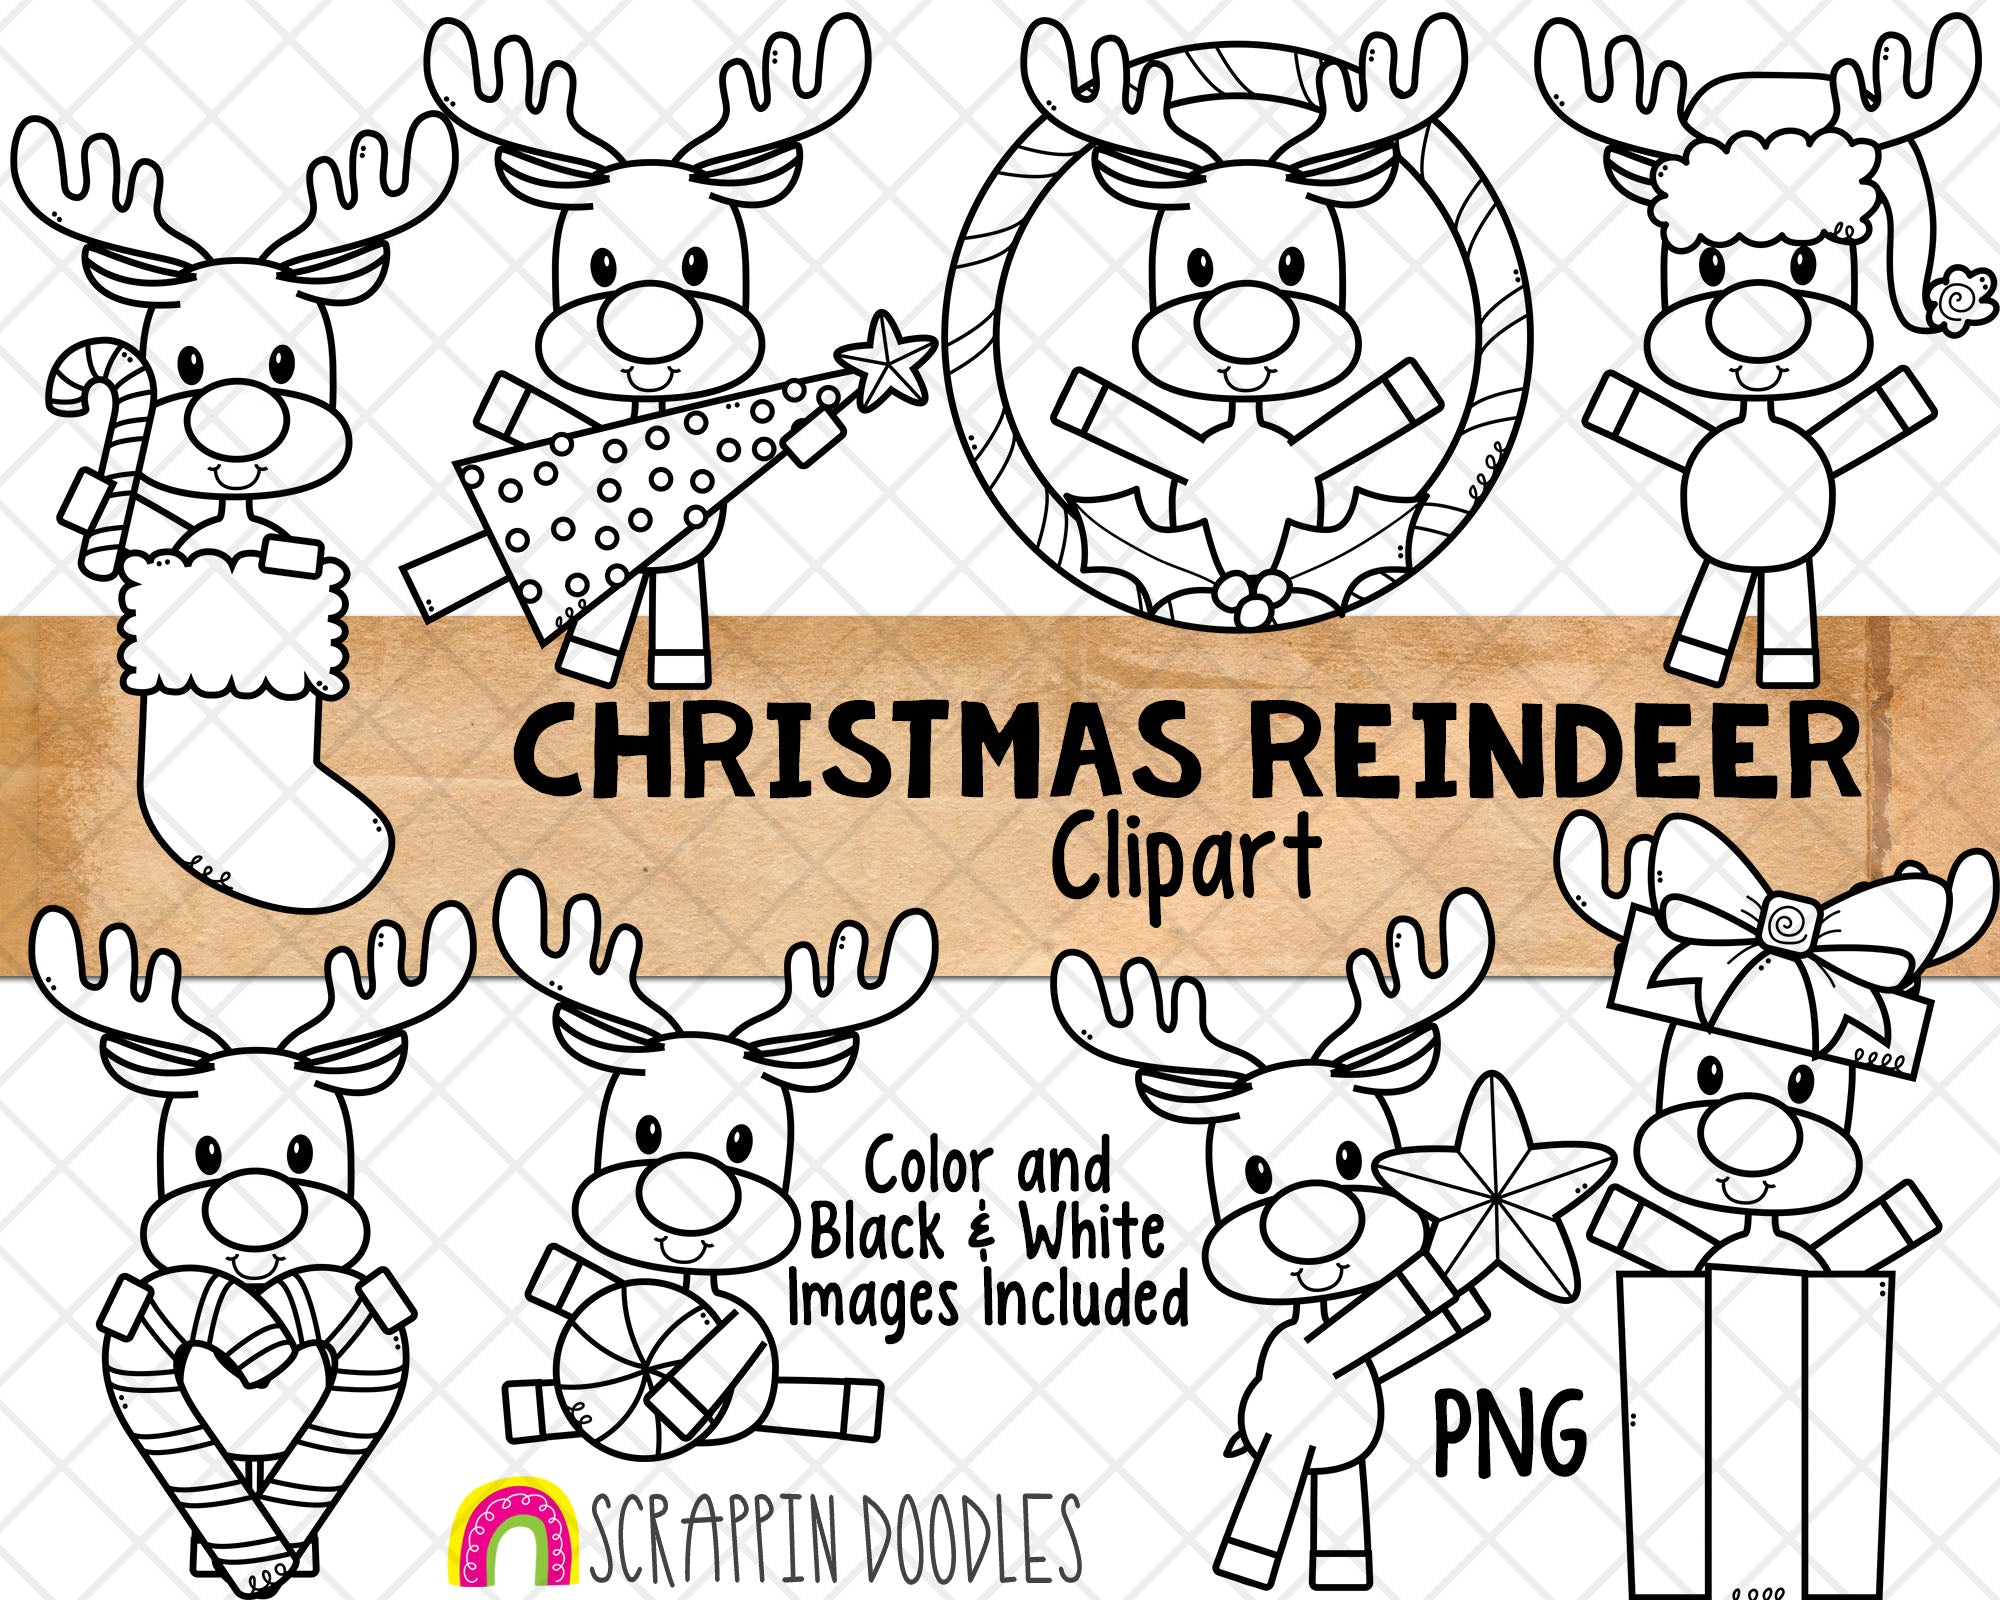 Christmas Reindeer Clip Art Rudolph Red Nose Graphics - Reind Scrappin Doodles